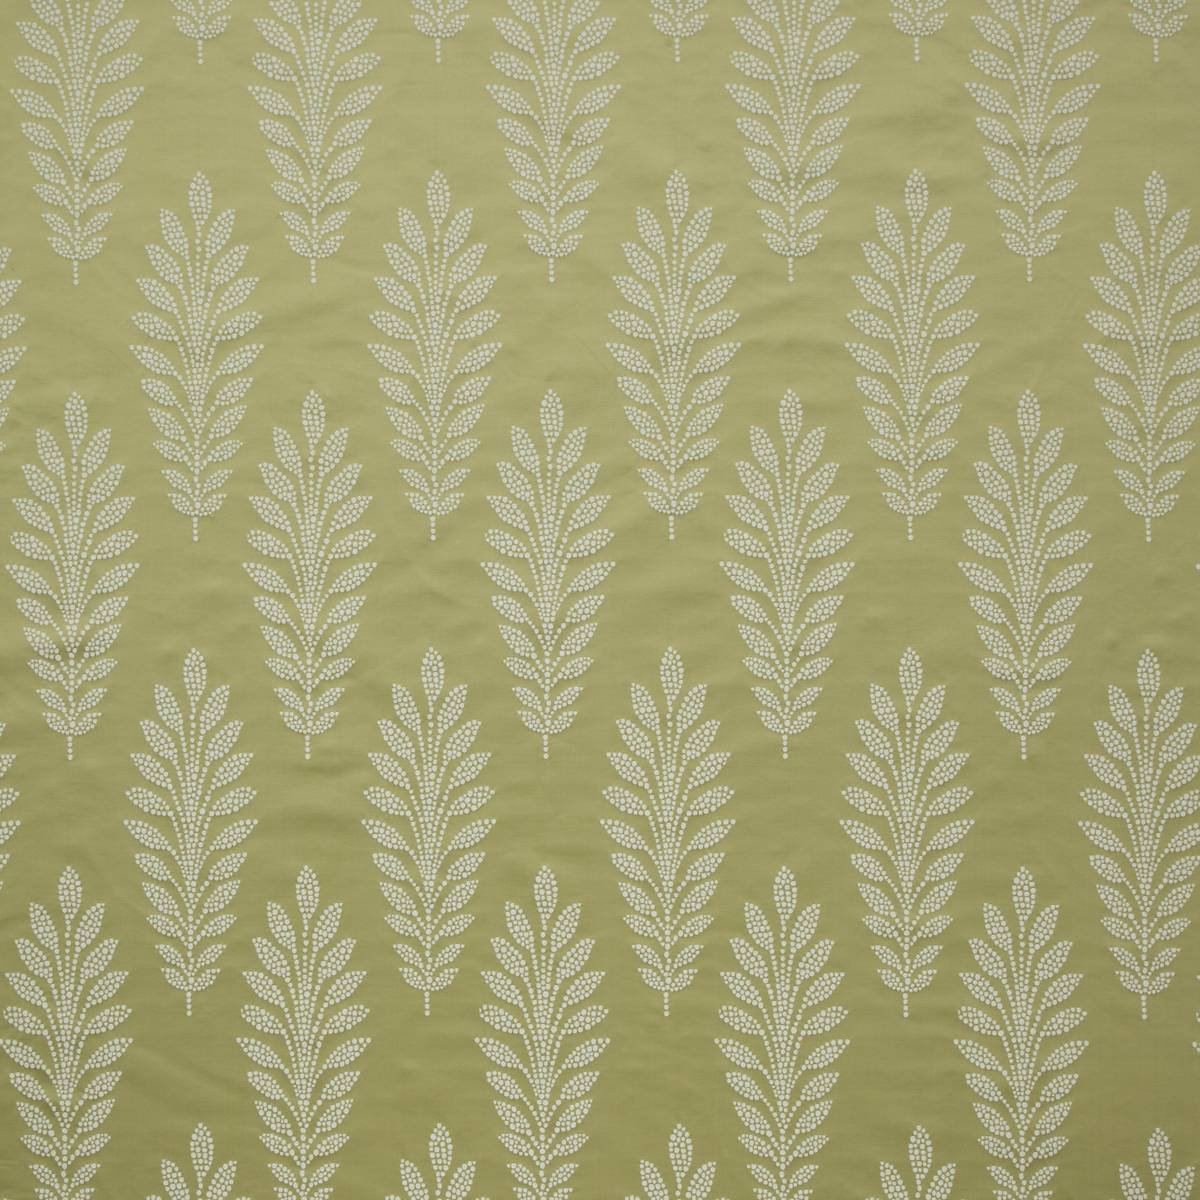 Simplicity Willow Fabric by iLiv